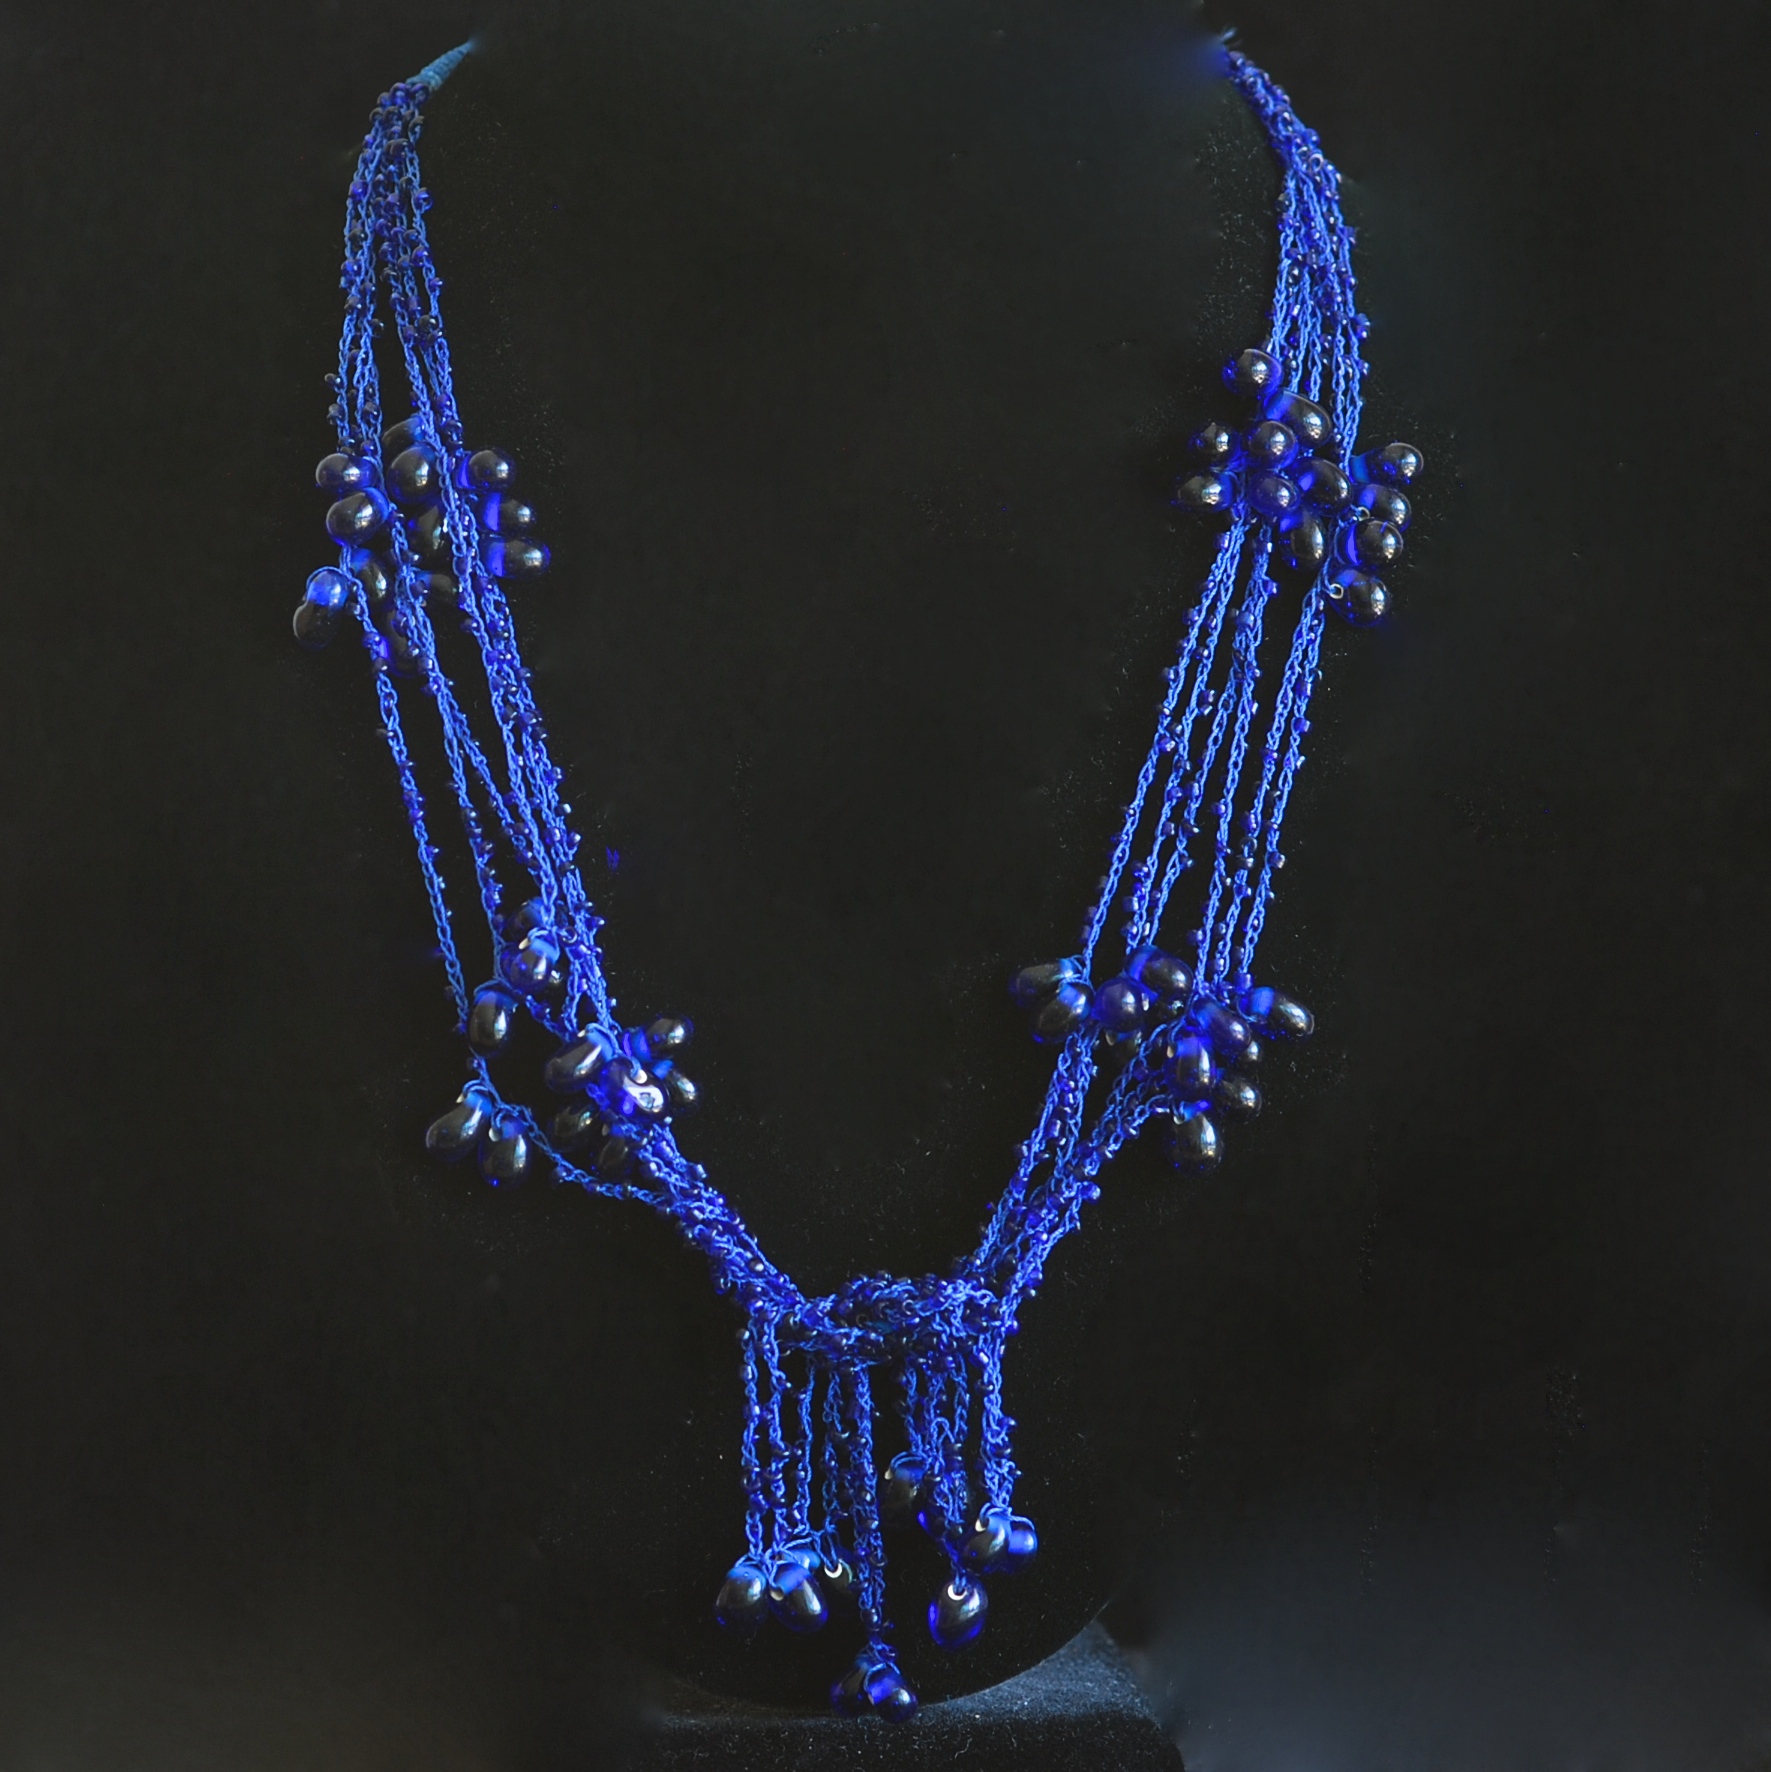 Cobalt Blue Asian Knot Necklace Multi Strand With Glass Beads | QUIET WEST